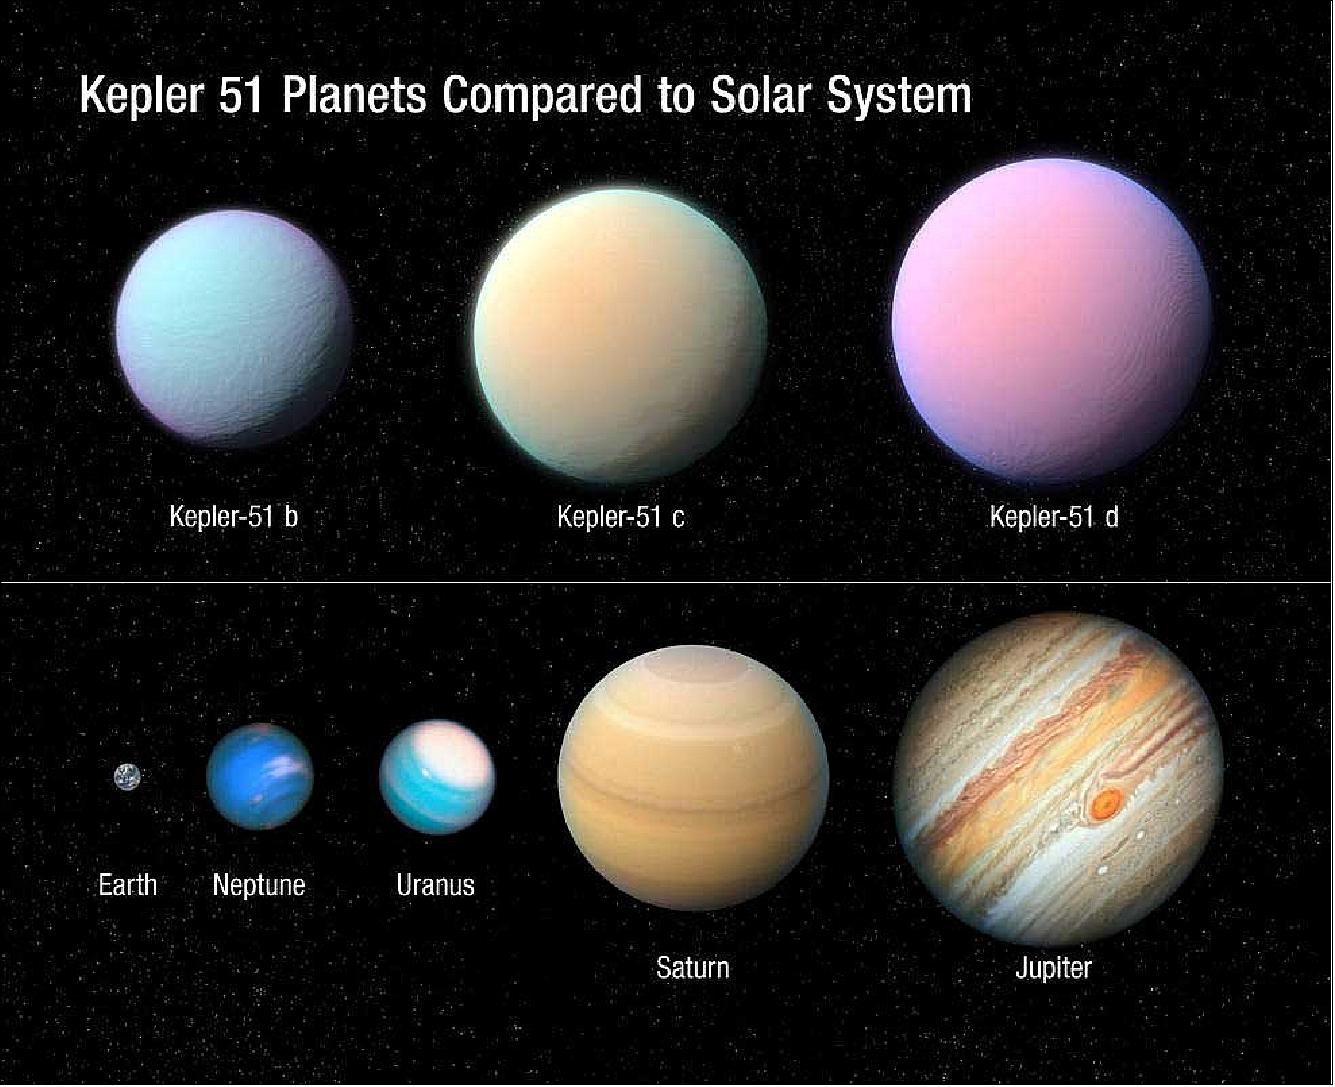 Figure 3: This illustration depicts the Sun-like star Kepler 51 and three giant planets that NASA's Kepler space telescope discovered in 2012–2014. These planets are all roughly the size of Jupiter but a tiny fraction of its mass. This means the planets have an extraordinarily low density, more like that of Styrofoam rather than rock or water, based on new Hubble Space Telescope observations. The planets may have formed much farther from their star and migrated inward. Now their puffed-up hydrogen/helium atmospheres are bleeding off into space. Eventually, much smaller planets might be left behind. The background starfield is correctly plotted as it would look if we gazed back toward our Sun from Kepler 51's distance of approximately 2,600 light-years, along our galaxy's Orion spiral arm. However, the Sun is too faint to be seen in this simulated naked-eye view. [image credit: NASA, ESA, and L. Hustak, J. Olmsted, D. Player and F. Summers (STScI)]